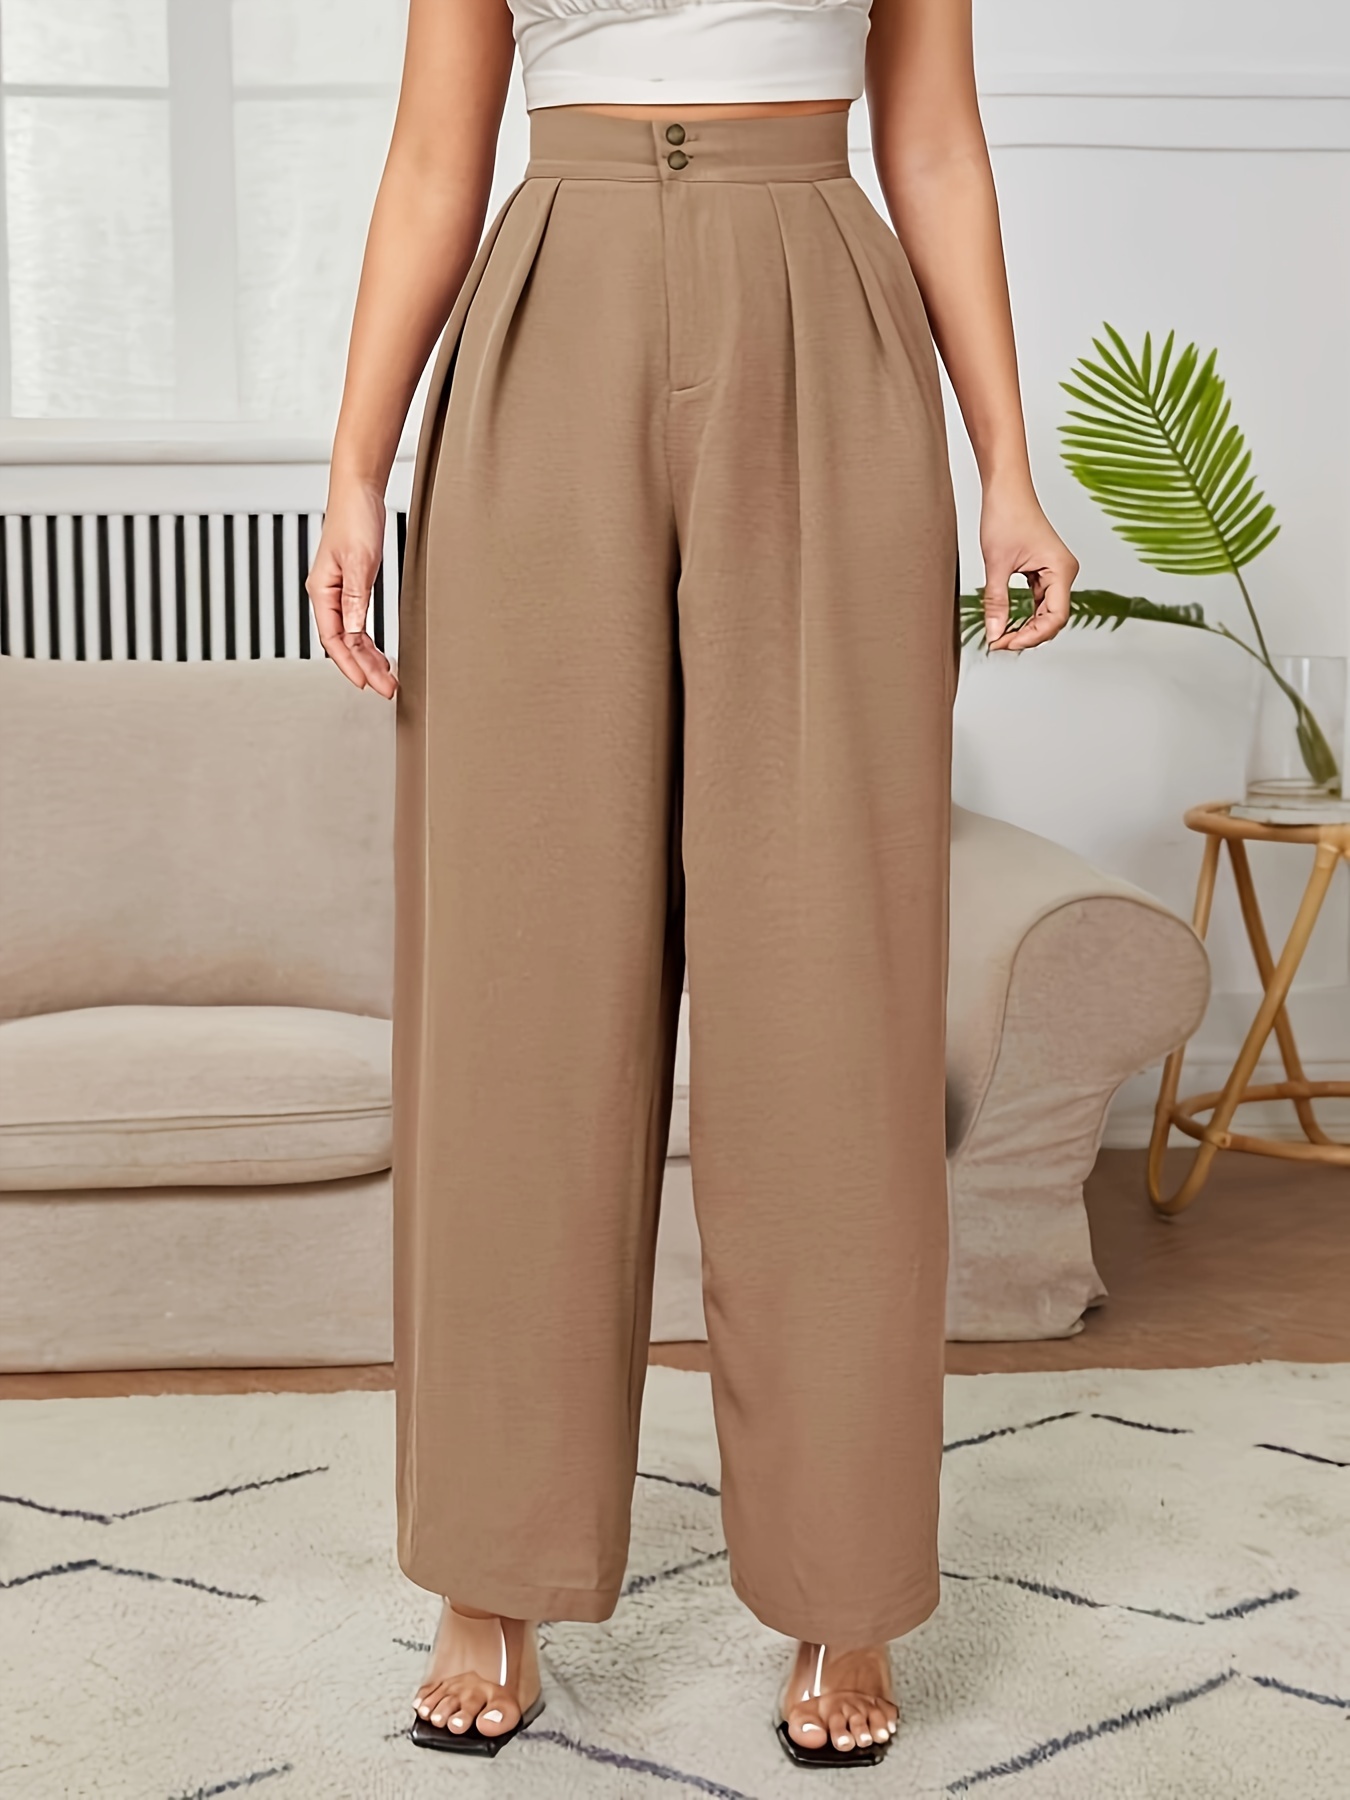 High Waist Ruched Knee Length Wide Leg Pants For Women Loose Fit, Large  Size, Fashionable 32 Degrees Clothing 210521 From Jiao02, $27.44